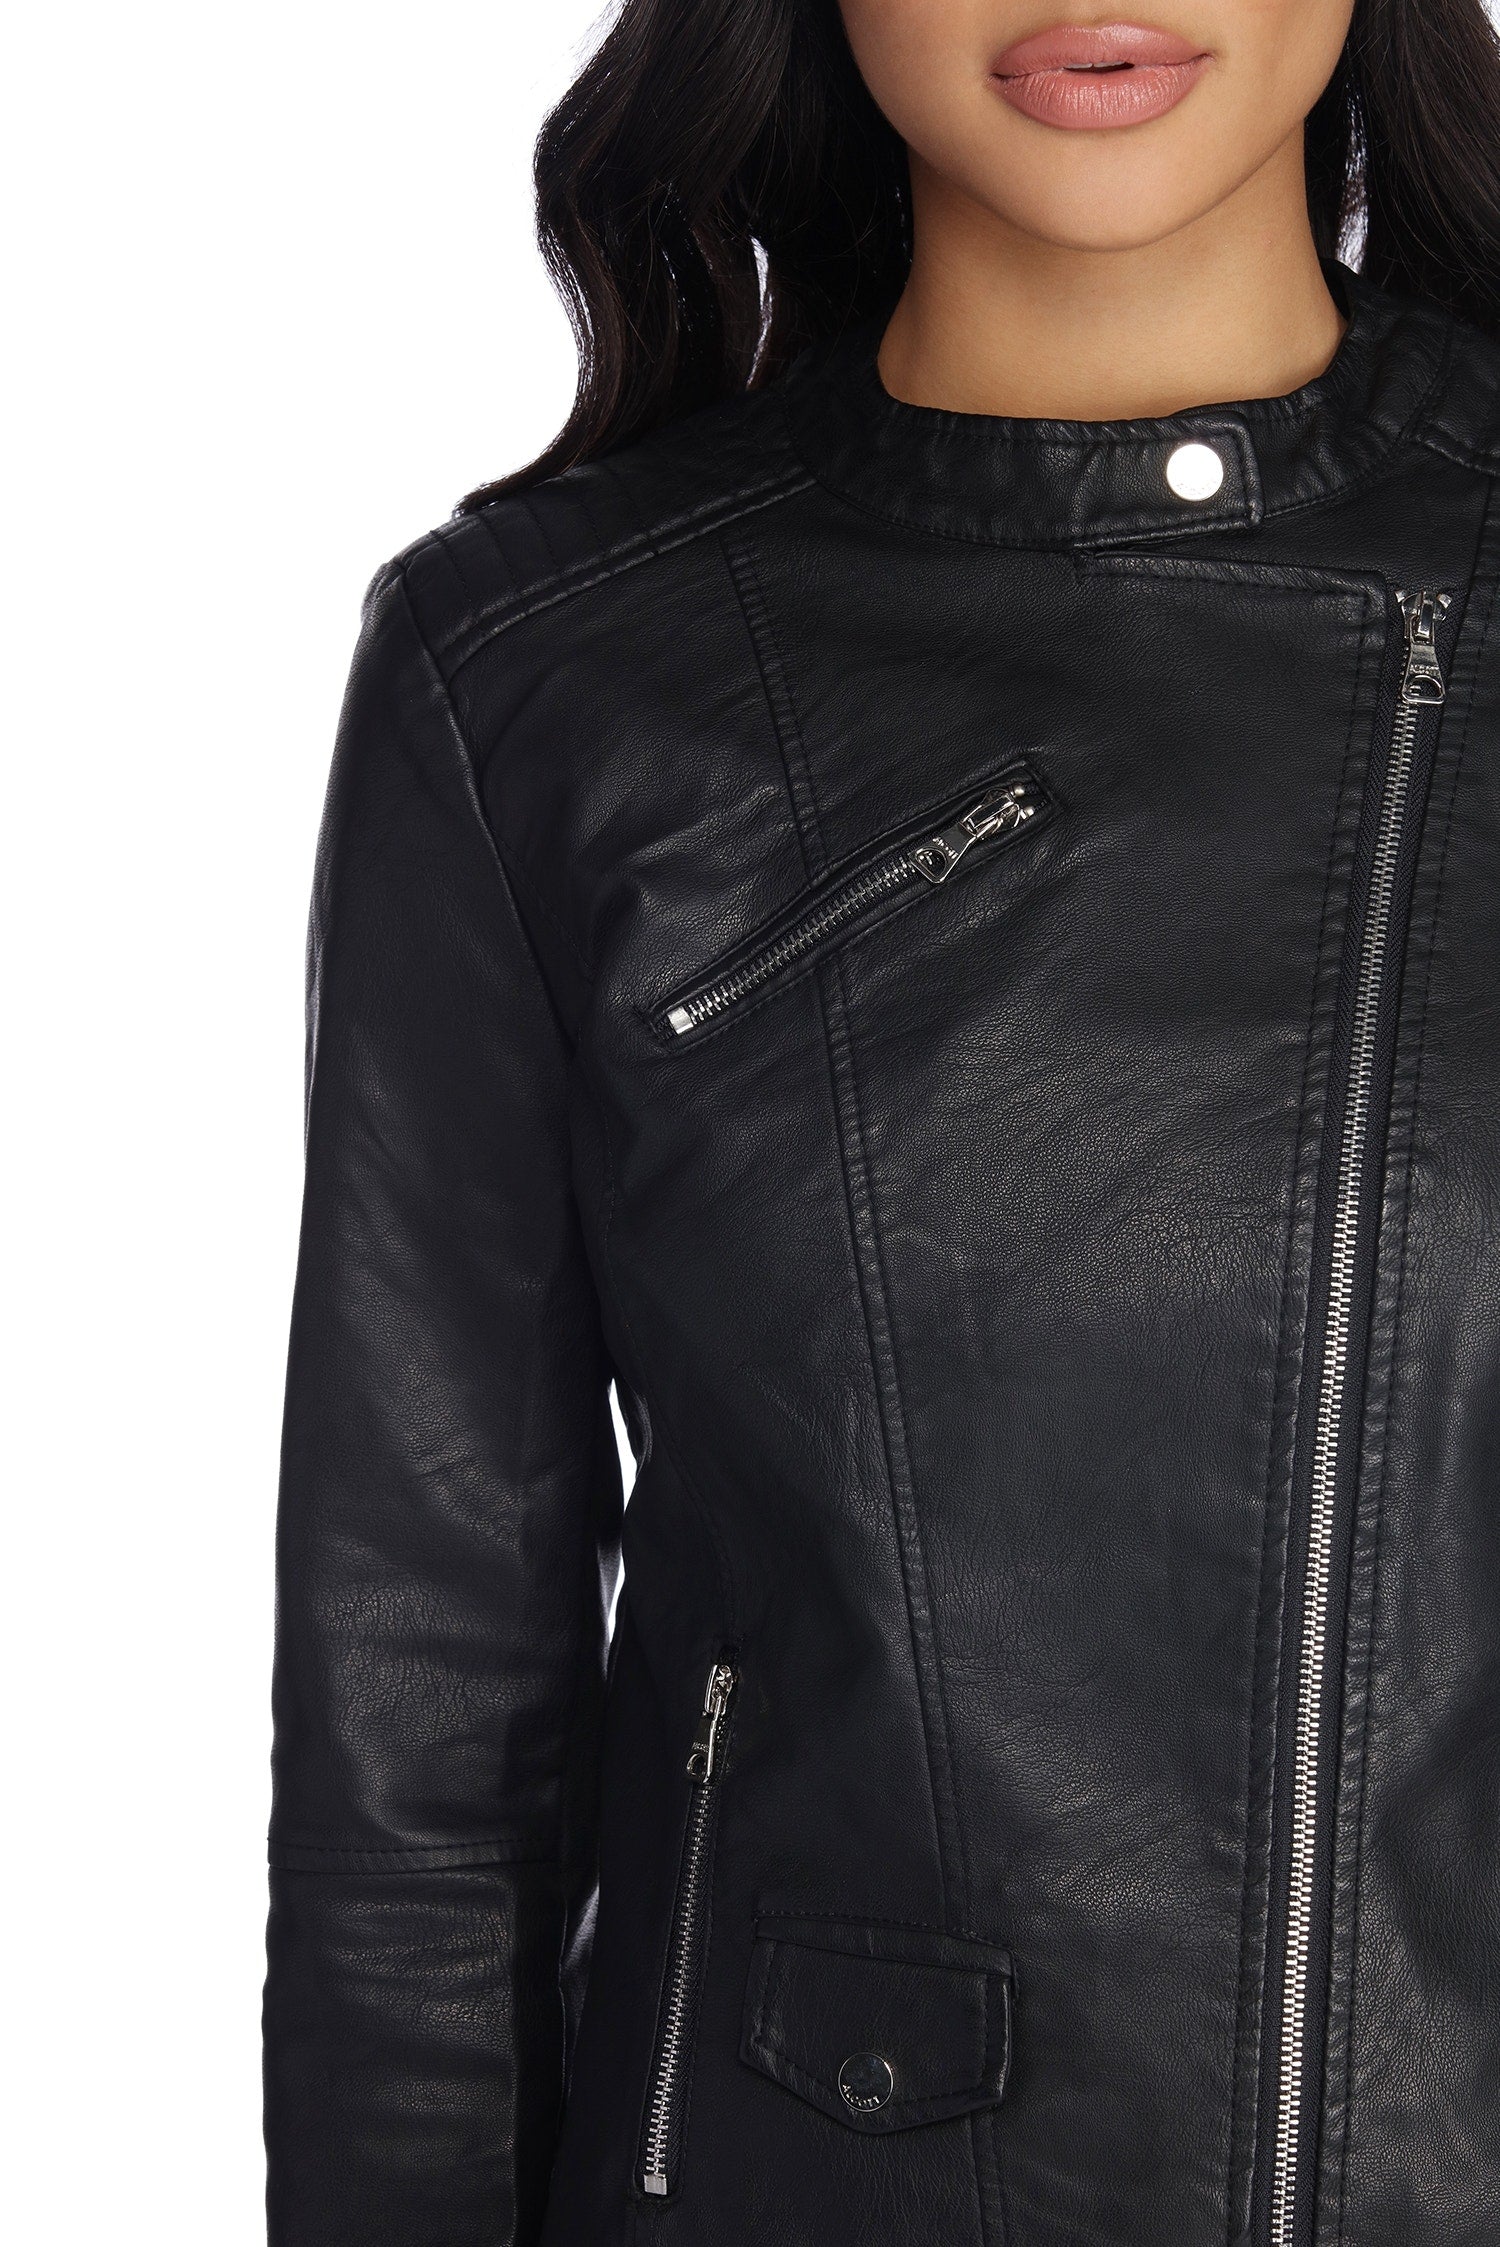 Bad Decisions Faux Leather Jacket